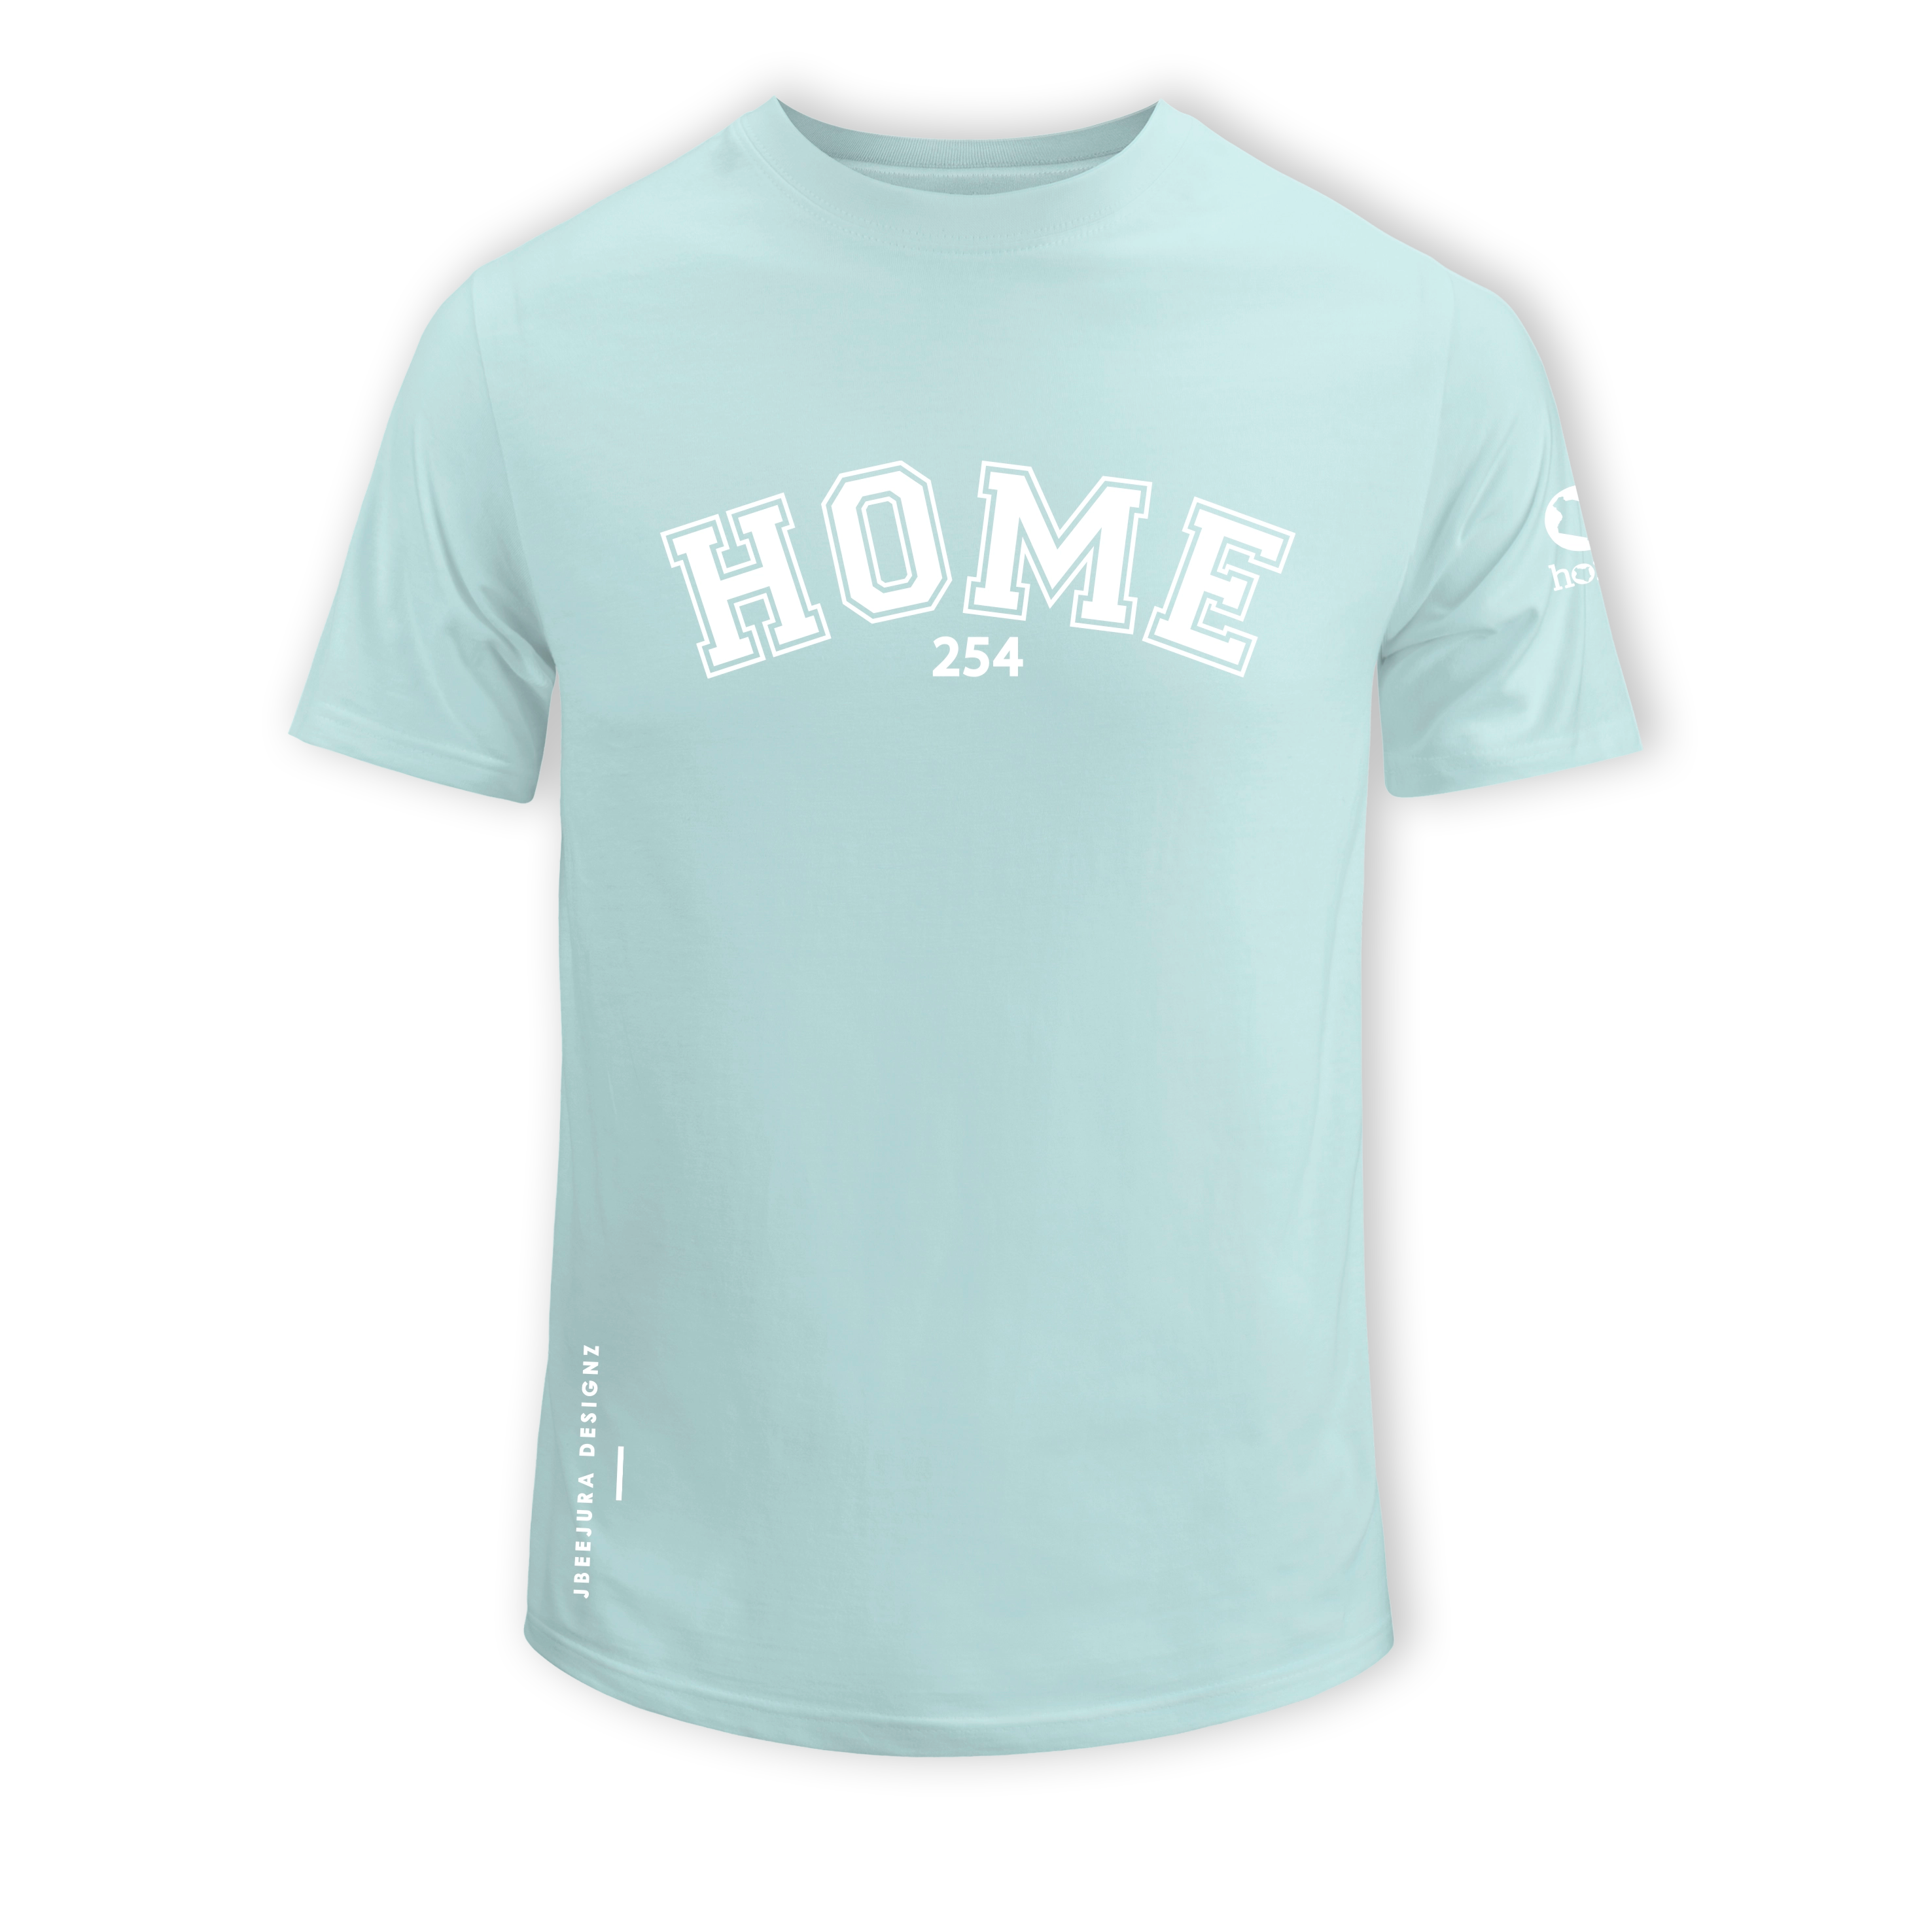 home_254 SHORT-SLEEVED MISTY BLUE T-SHIRT WITH A WHITE COLLEGE PRINT – COTTON PLUS FABRIC